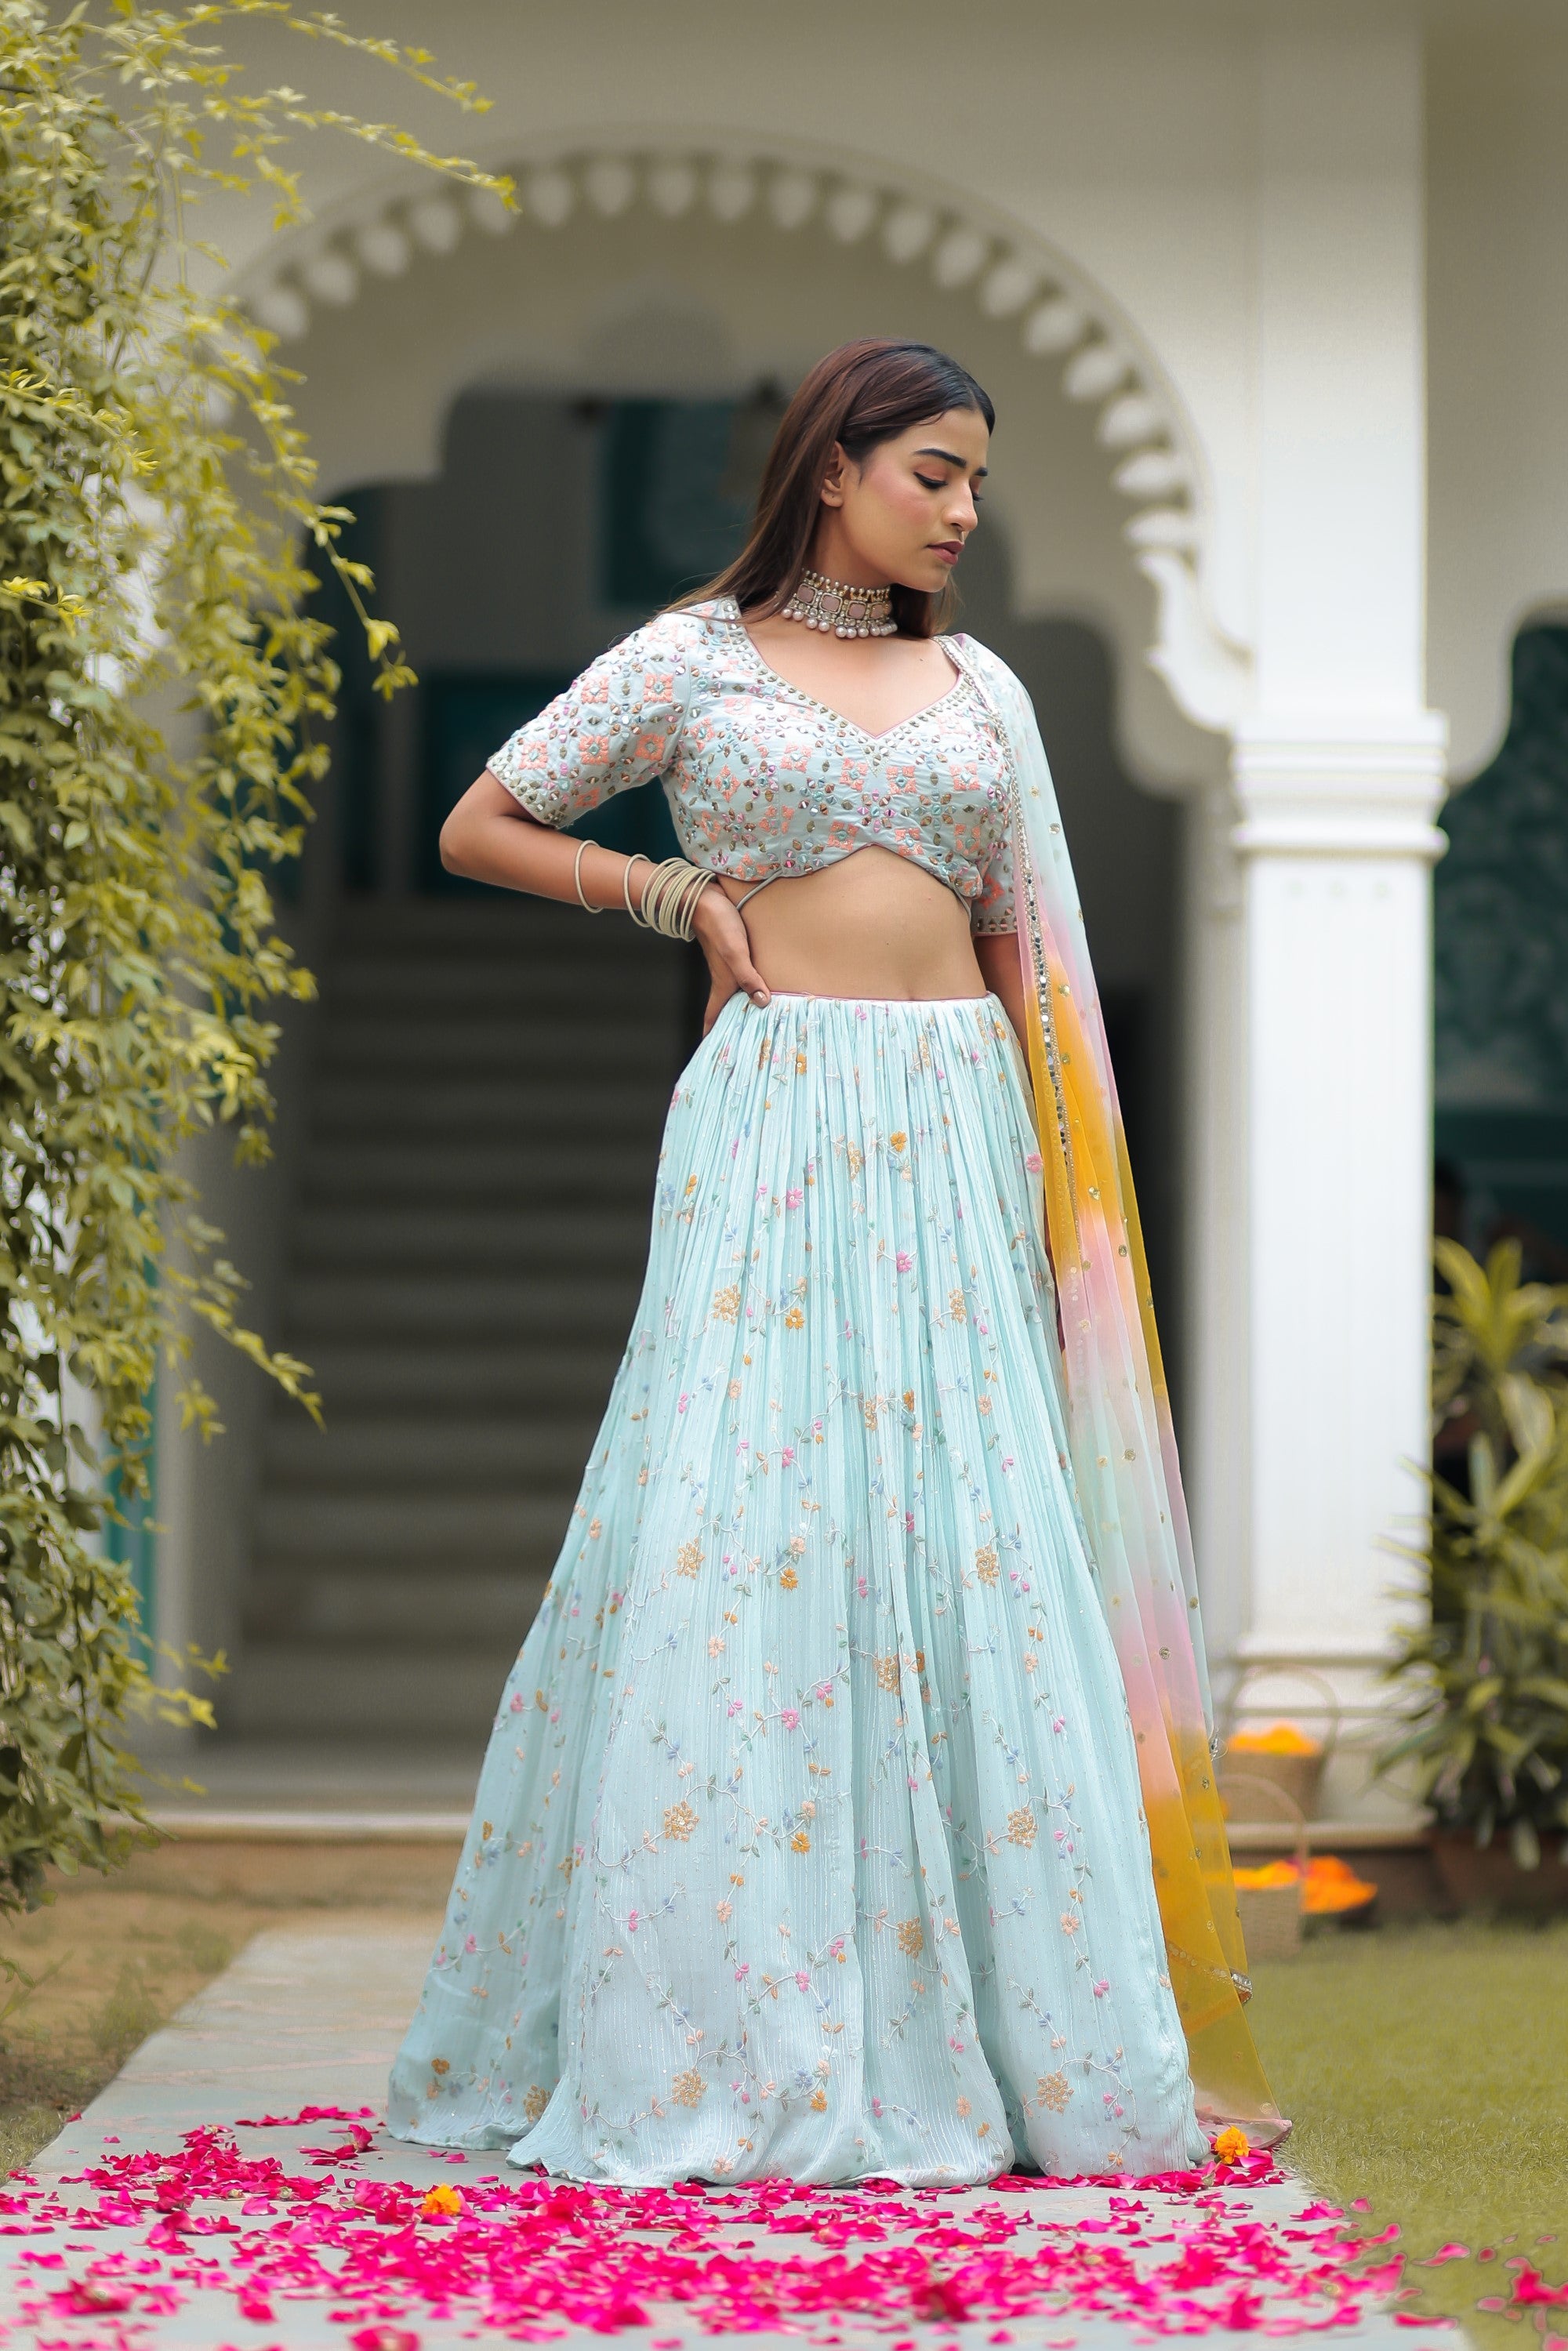 Looking for Bridal Lehenga Store Online with International Courier? | Red bridal  dress, Bridal lehenga online, Sabyasachi lehenga bridal